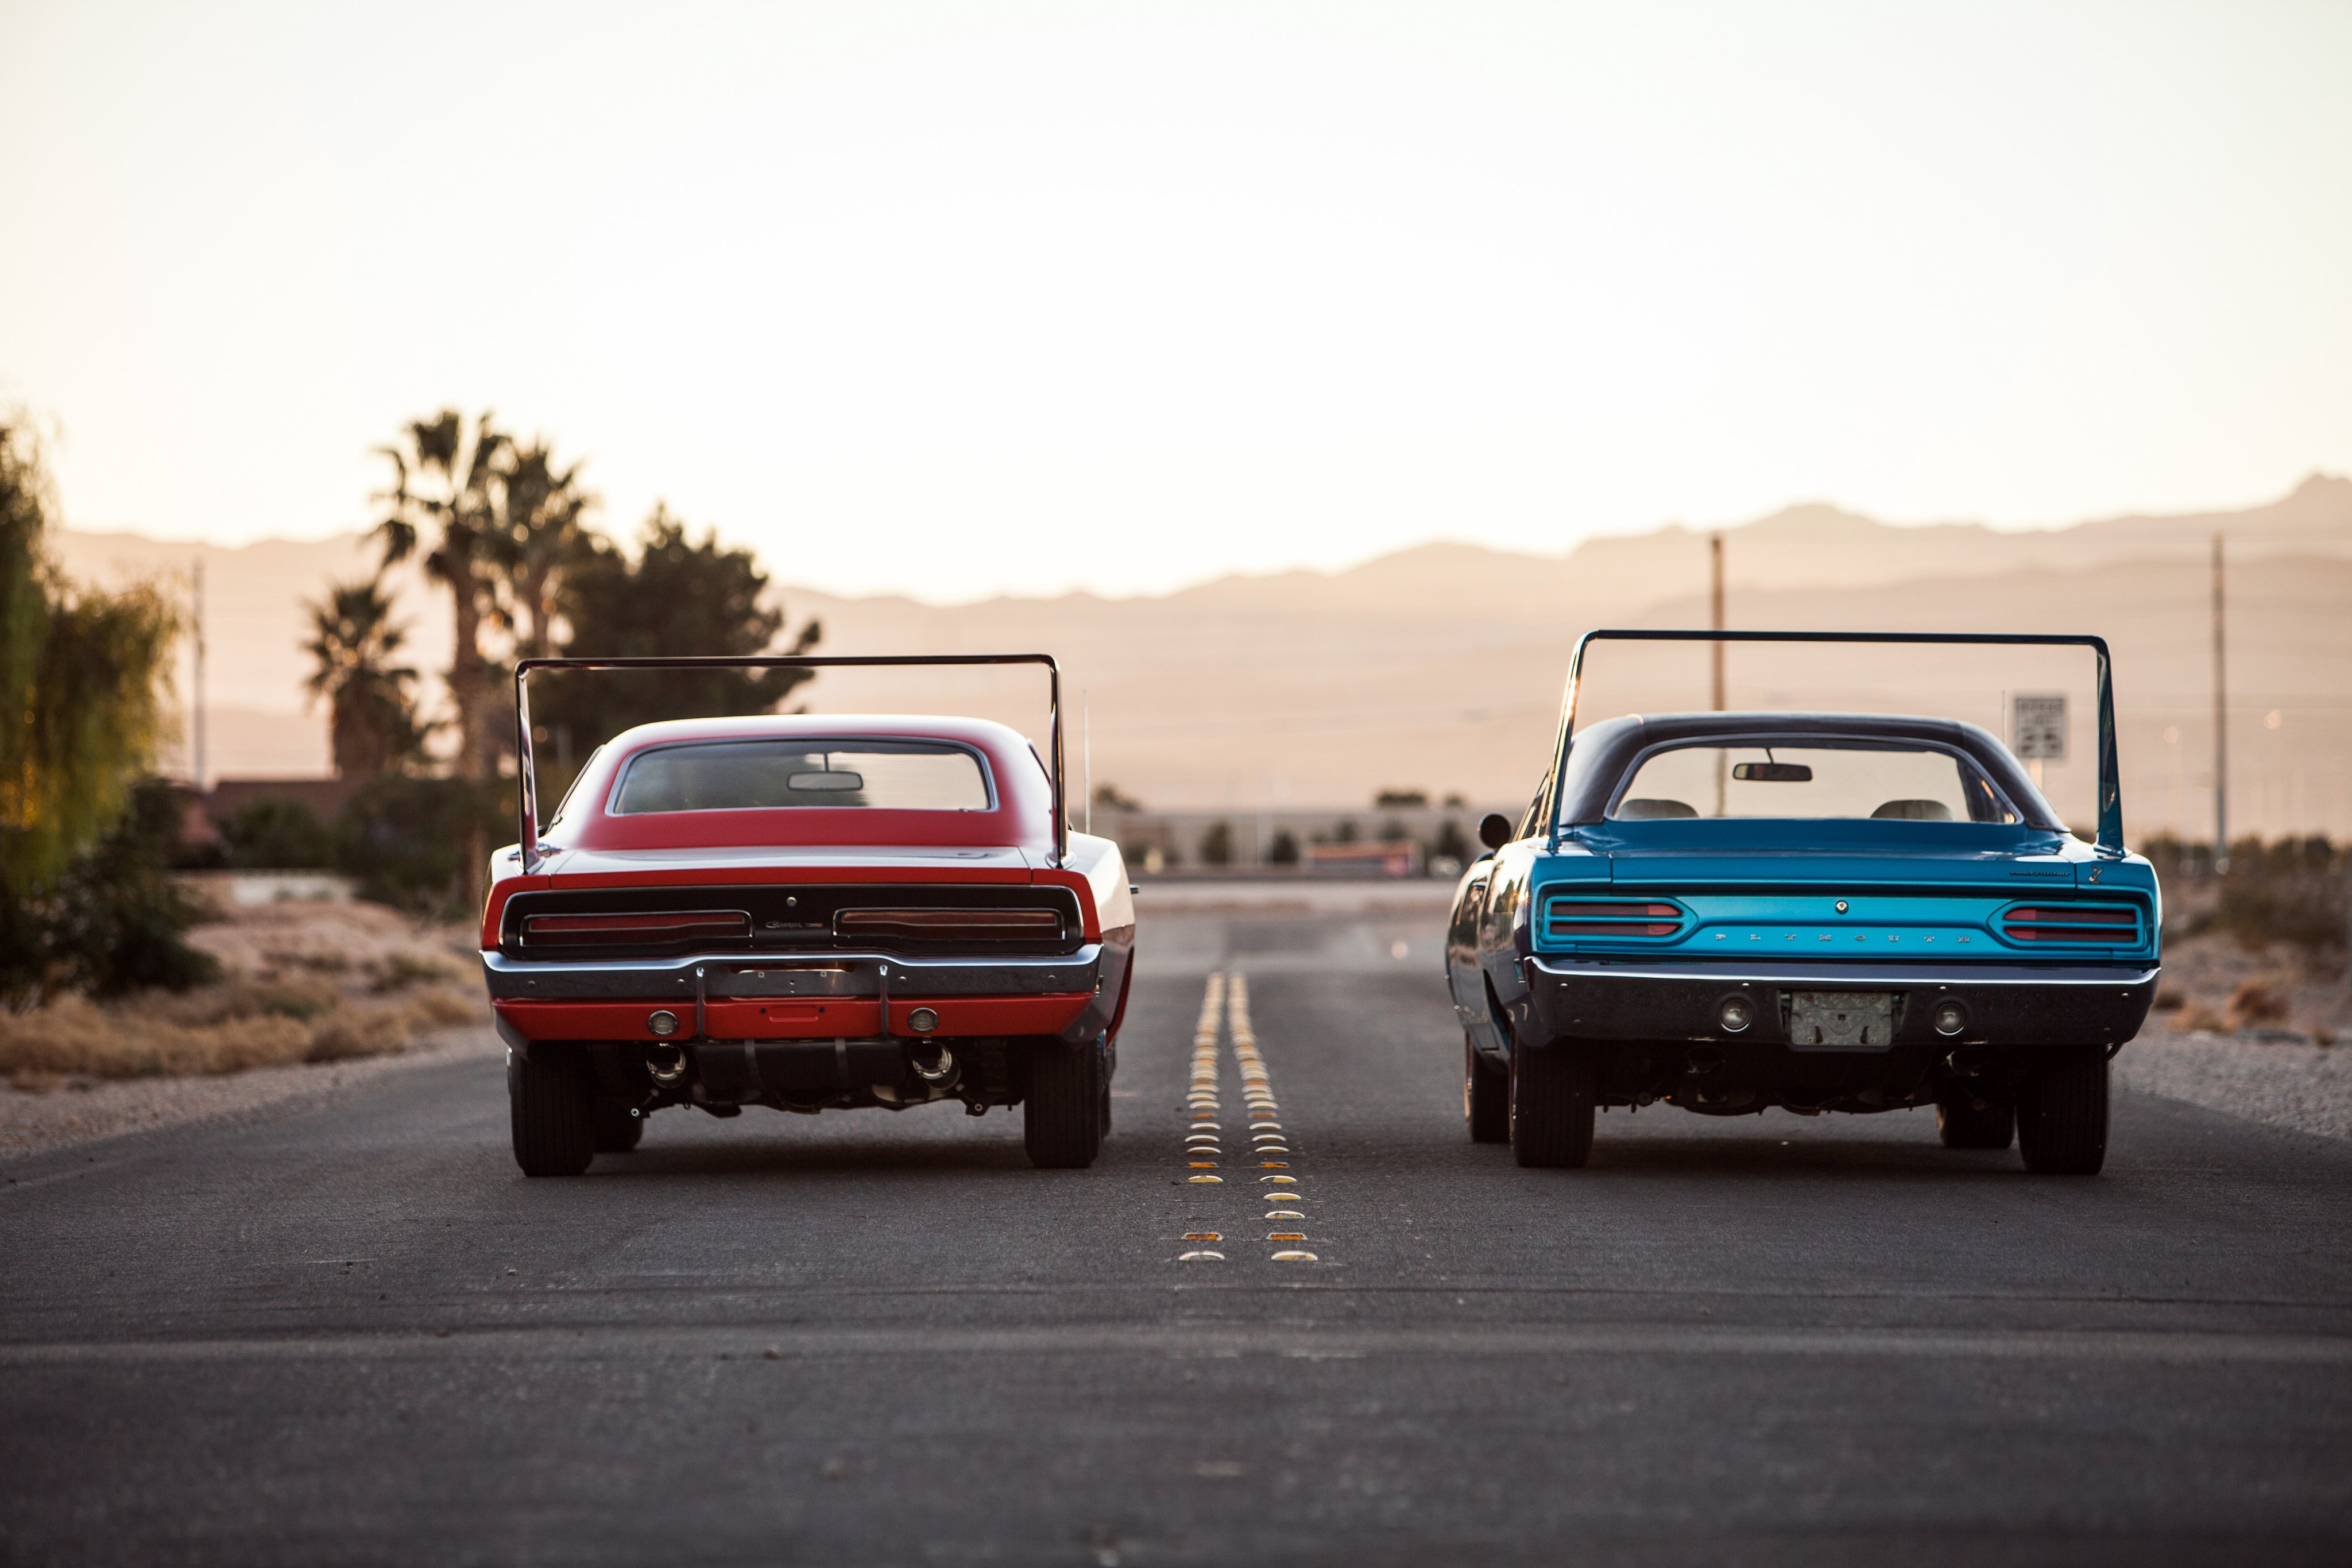 HD Wallpaper Of A Dodge Charger Daytona And Plymouth